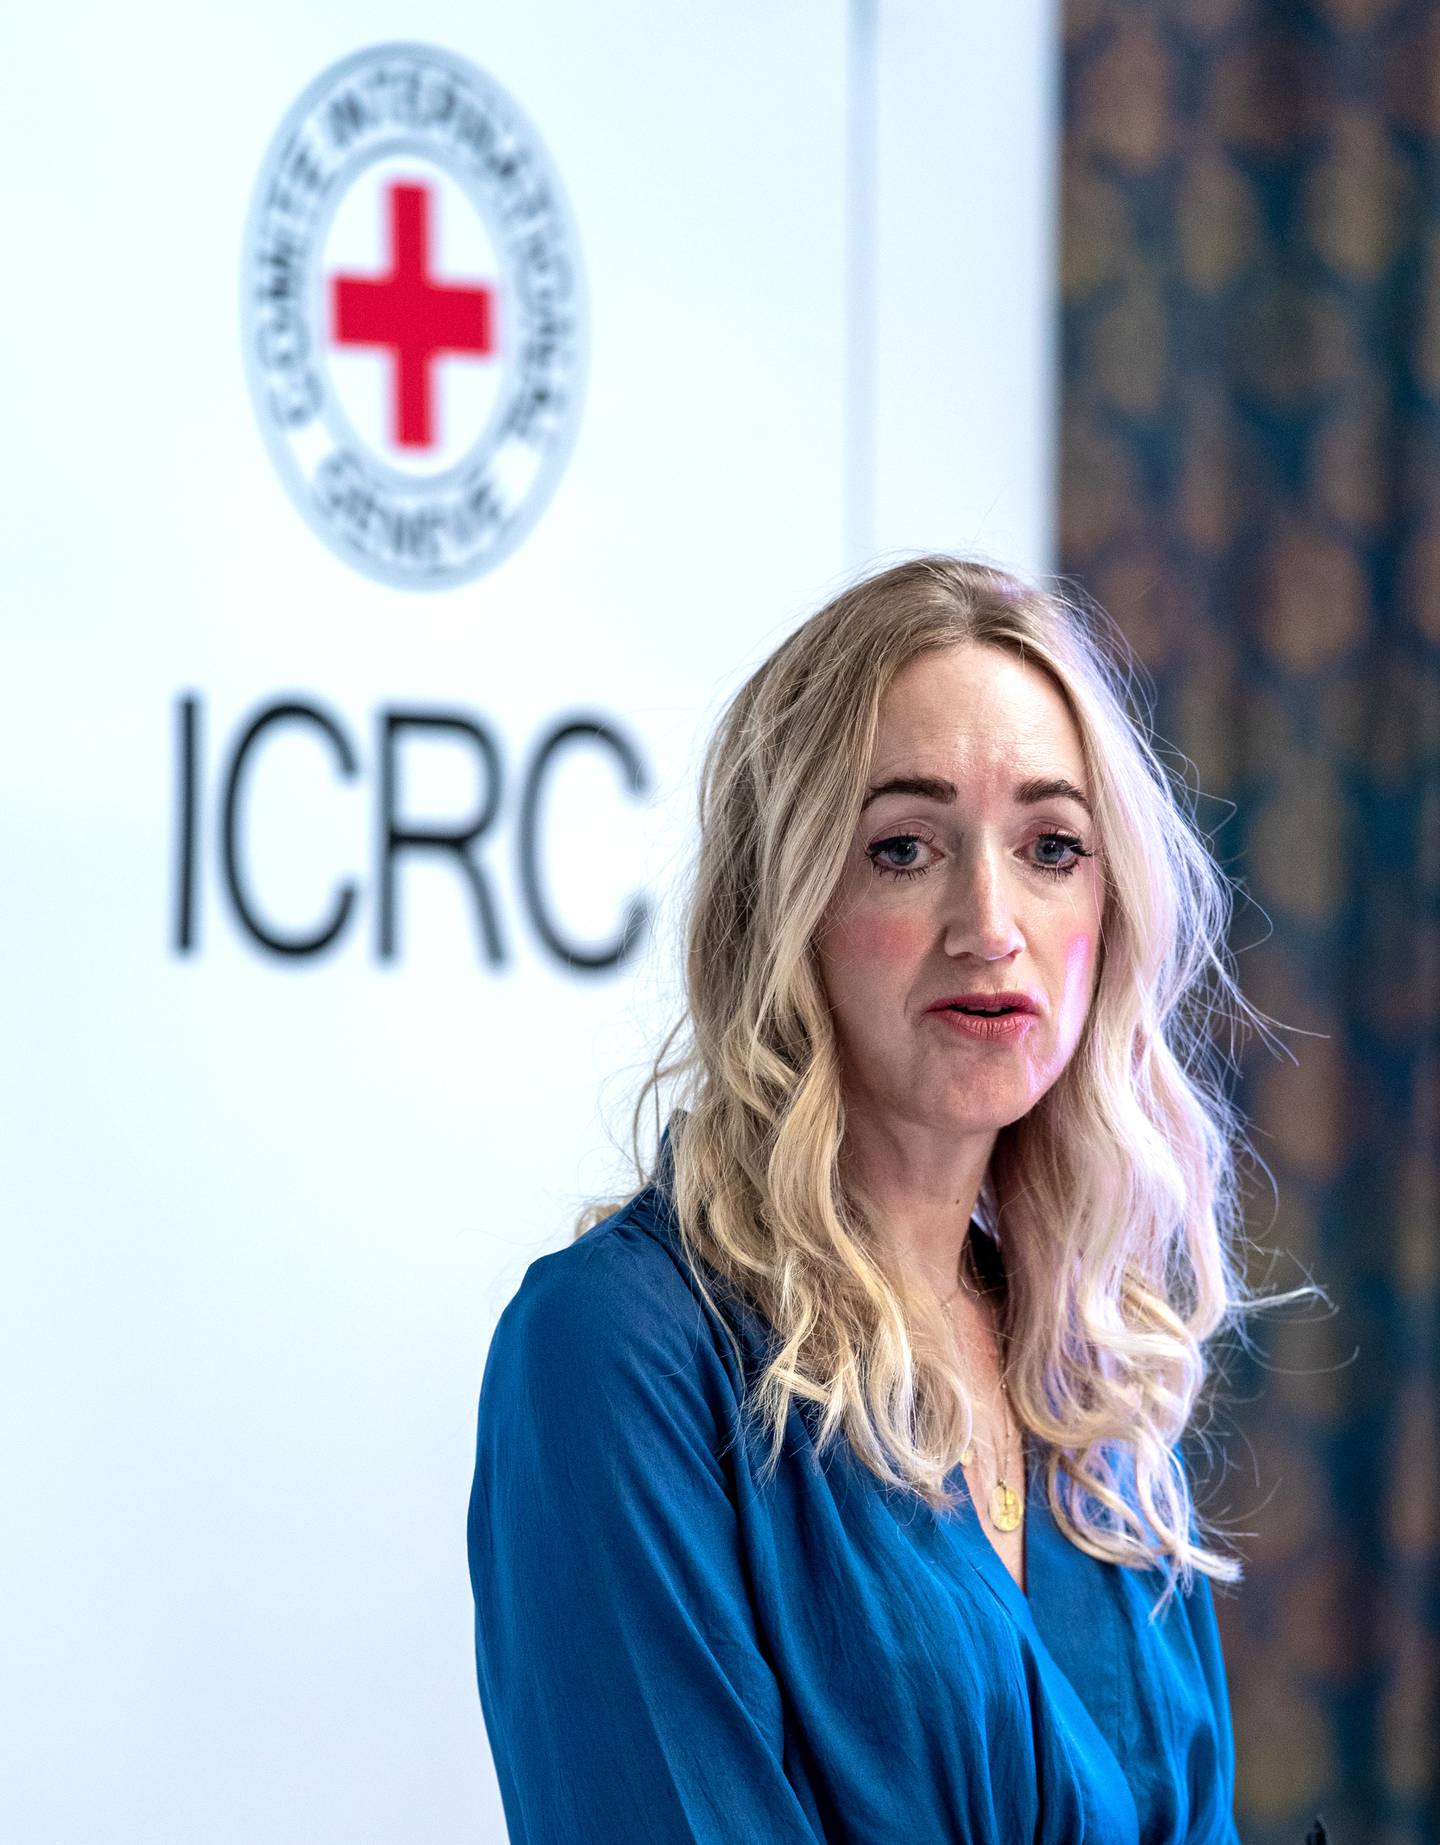 Claire Dalton, head of the ICRC's UAE mission, said the agreement paves the way for further cooperation and dialogue with the authorities. Victor Bessa/The National